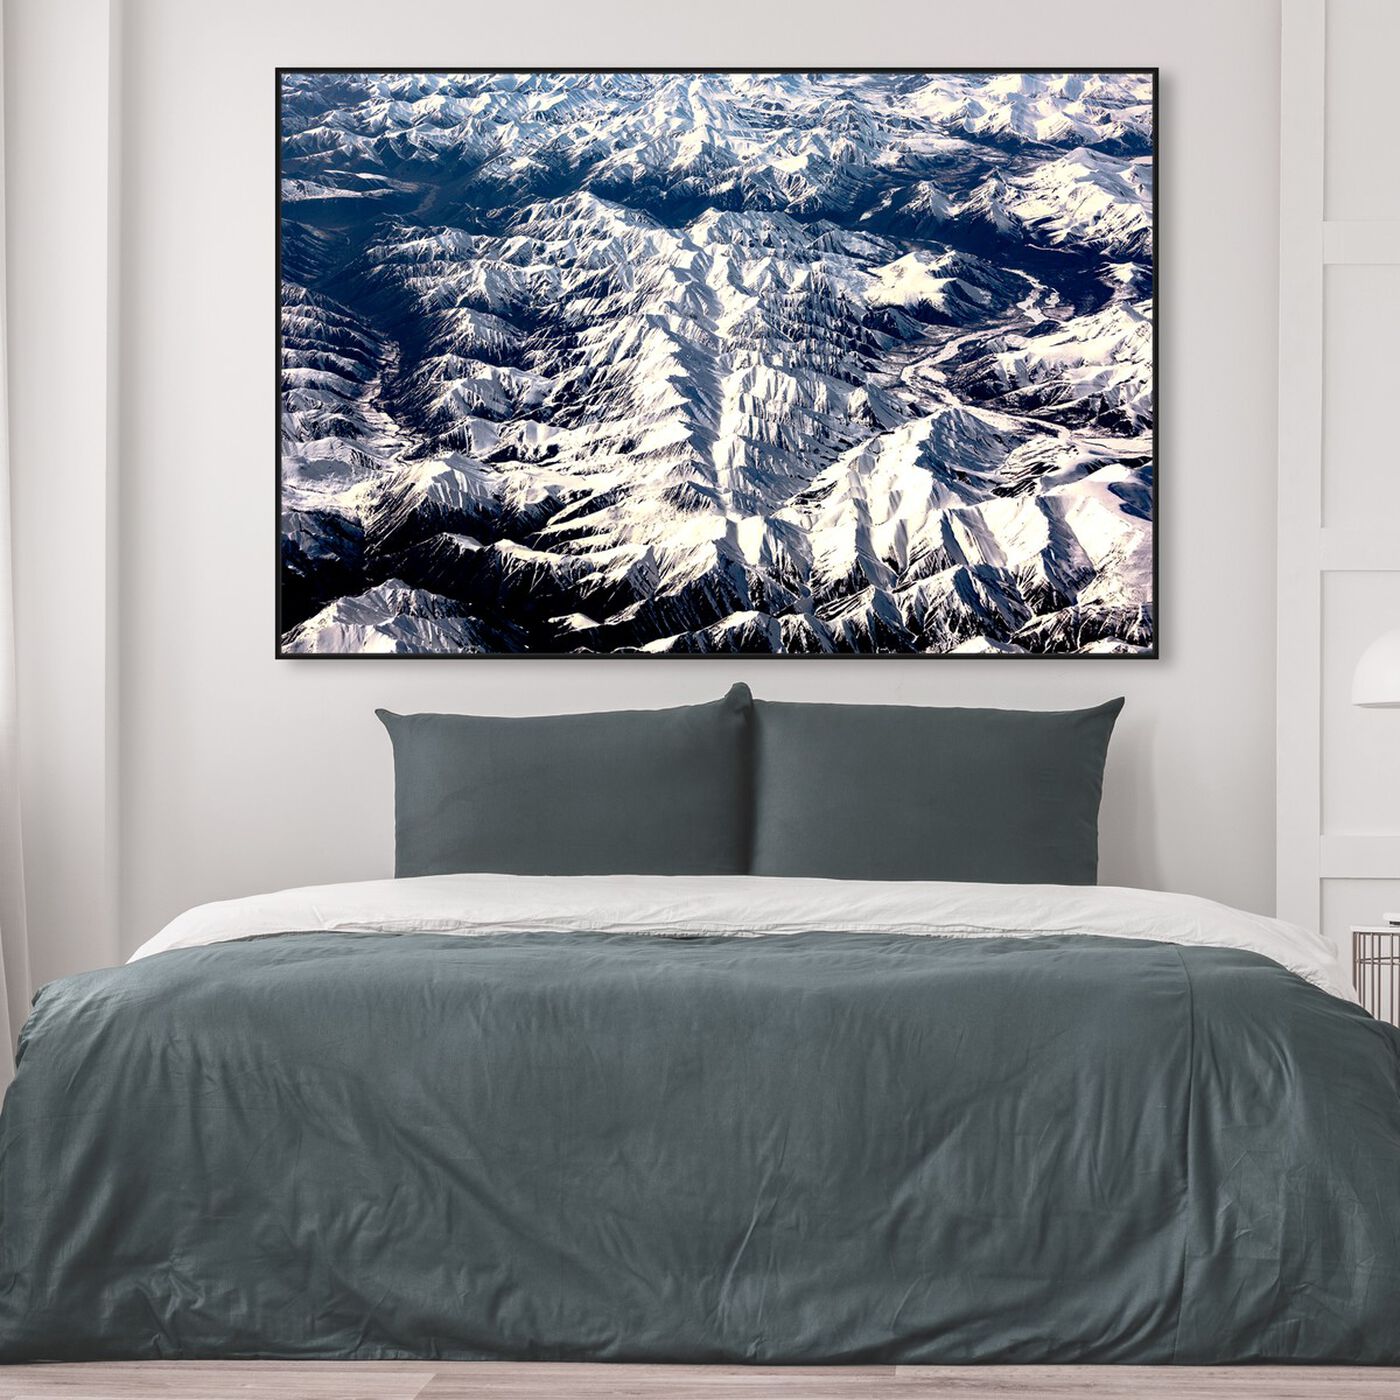 Hanging view of Curro Cardenal - Aero View III featuring nature and landscape and mountains art.